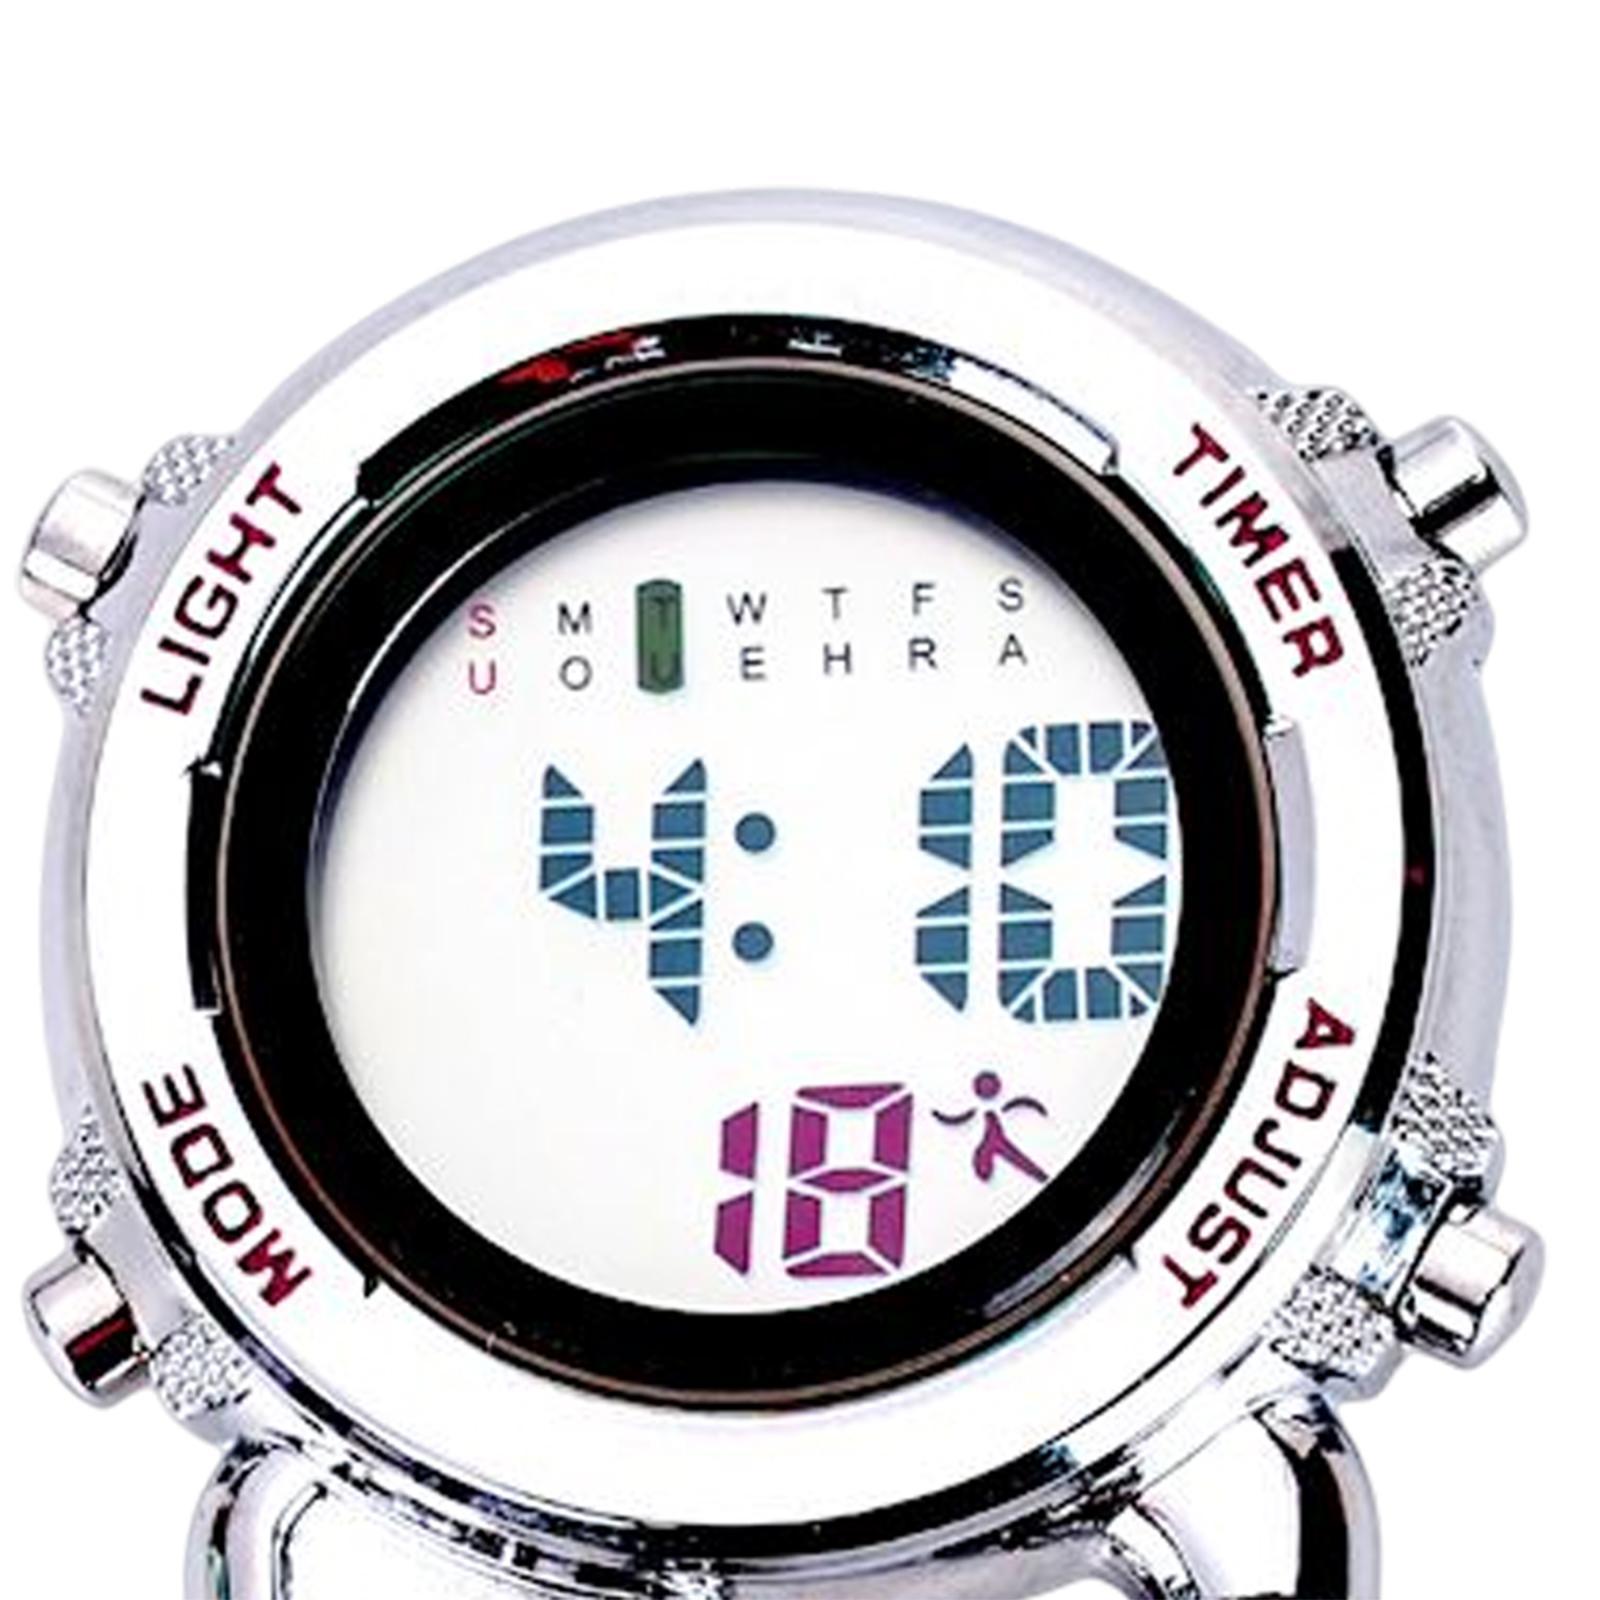 Digital Carabiner Watch White Dial with Backlight for Work Outdoor Sports